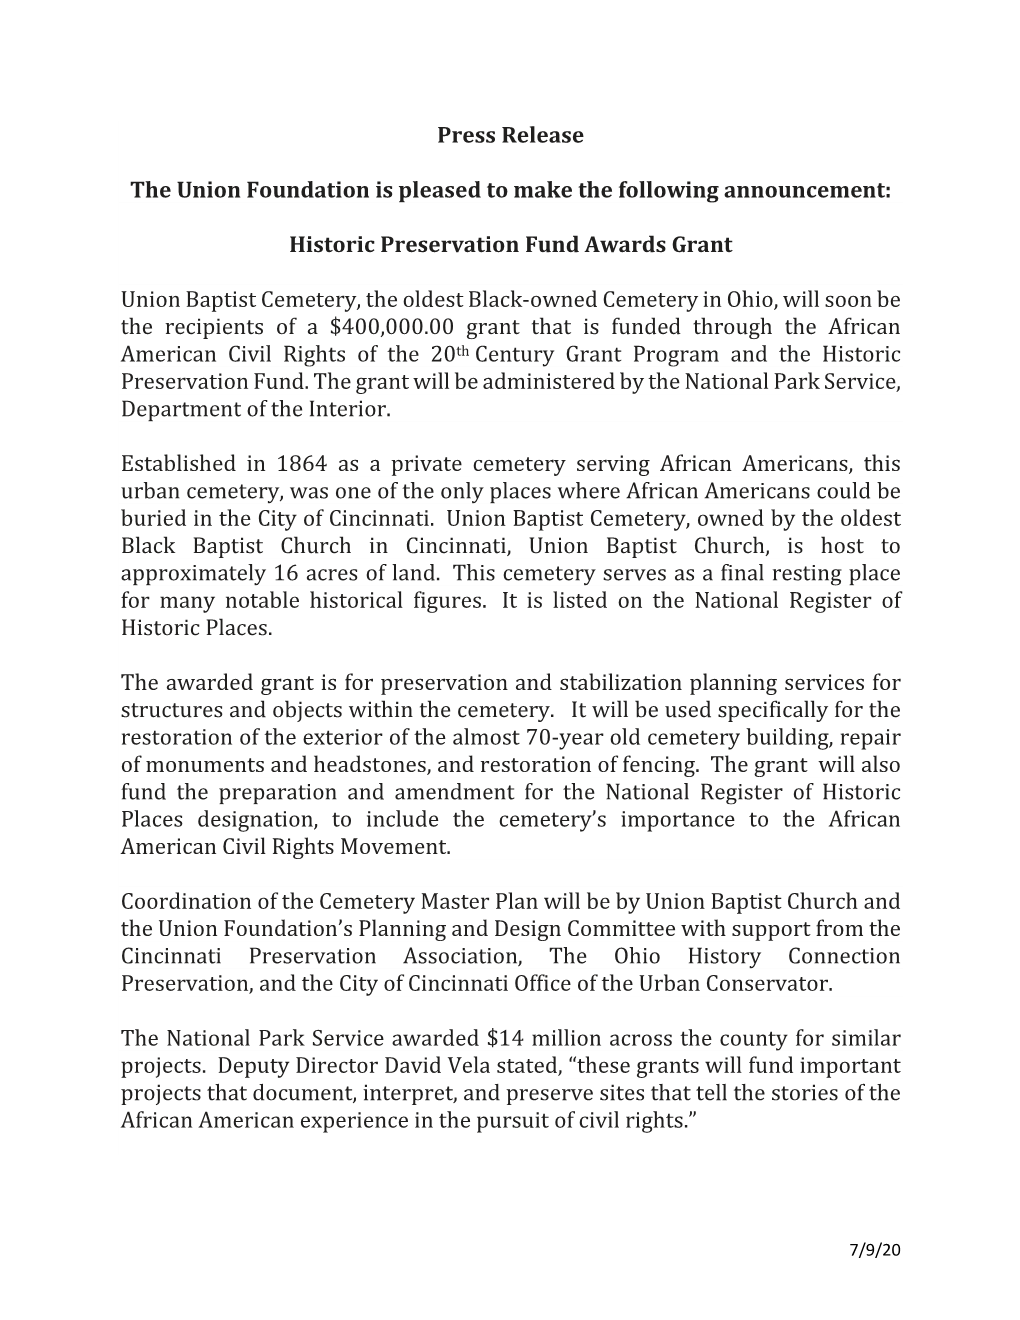 Press Release the Union Foundation Is Pleased to Make the Following